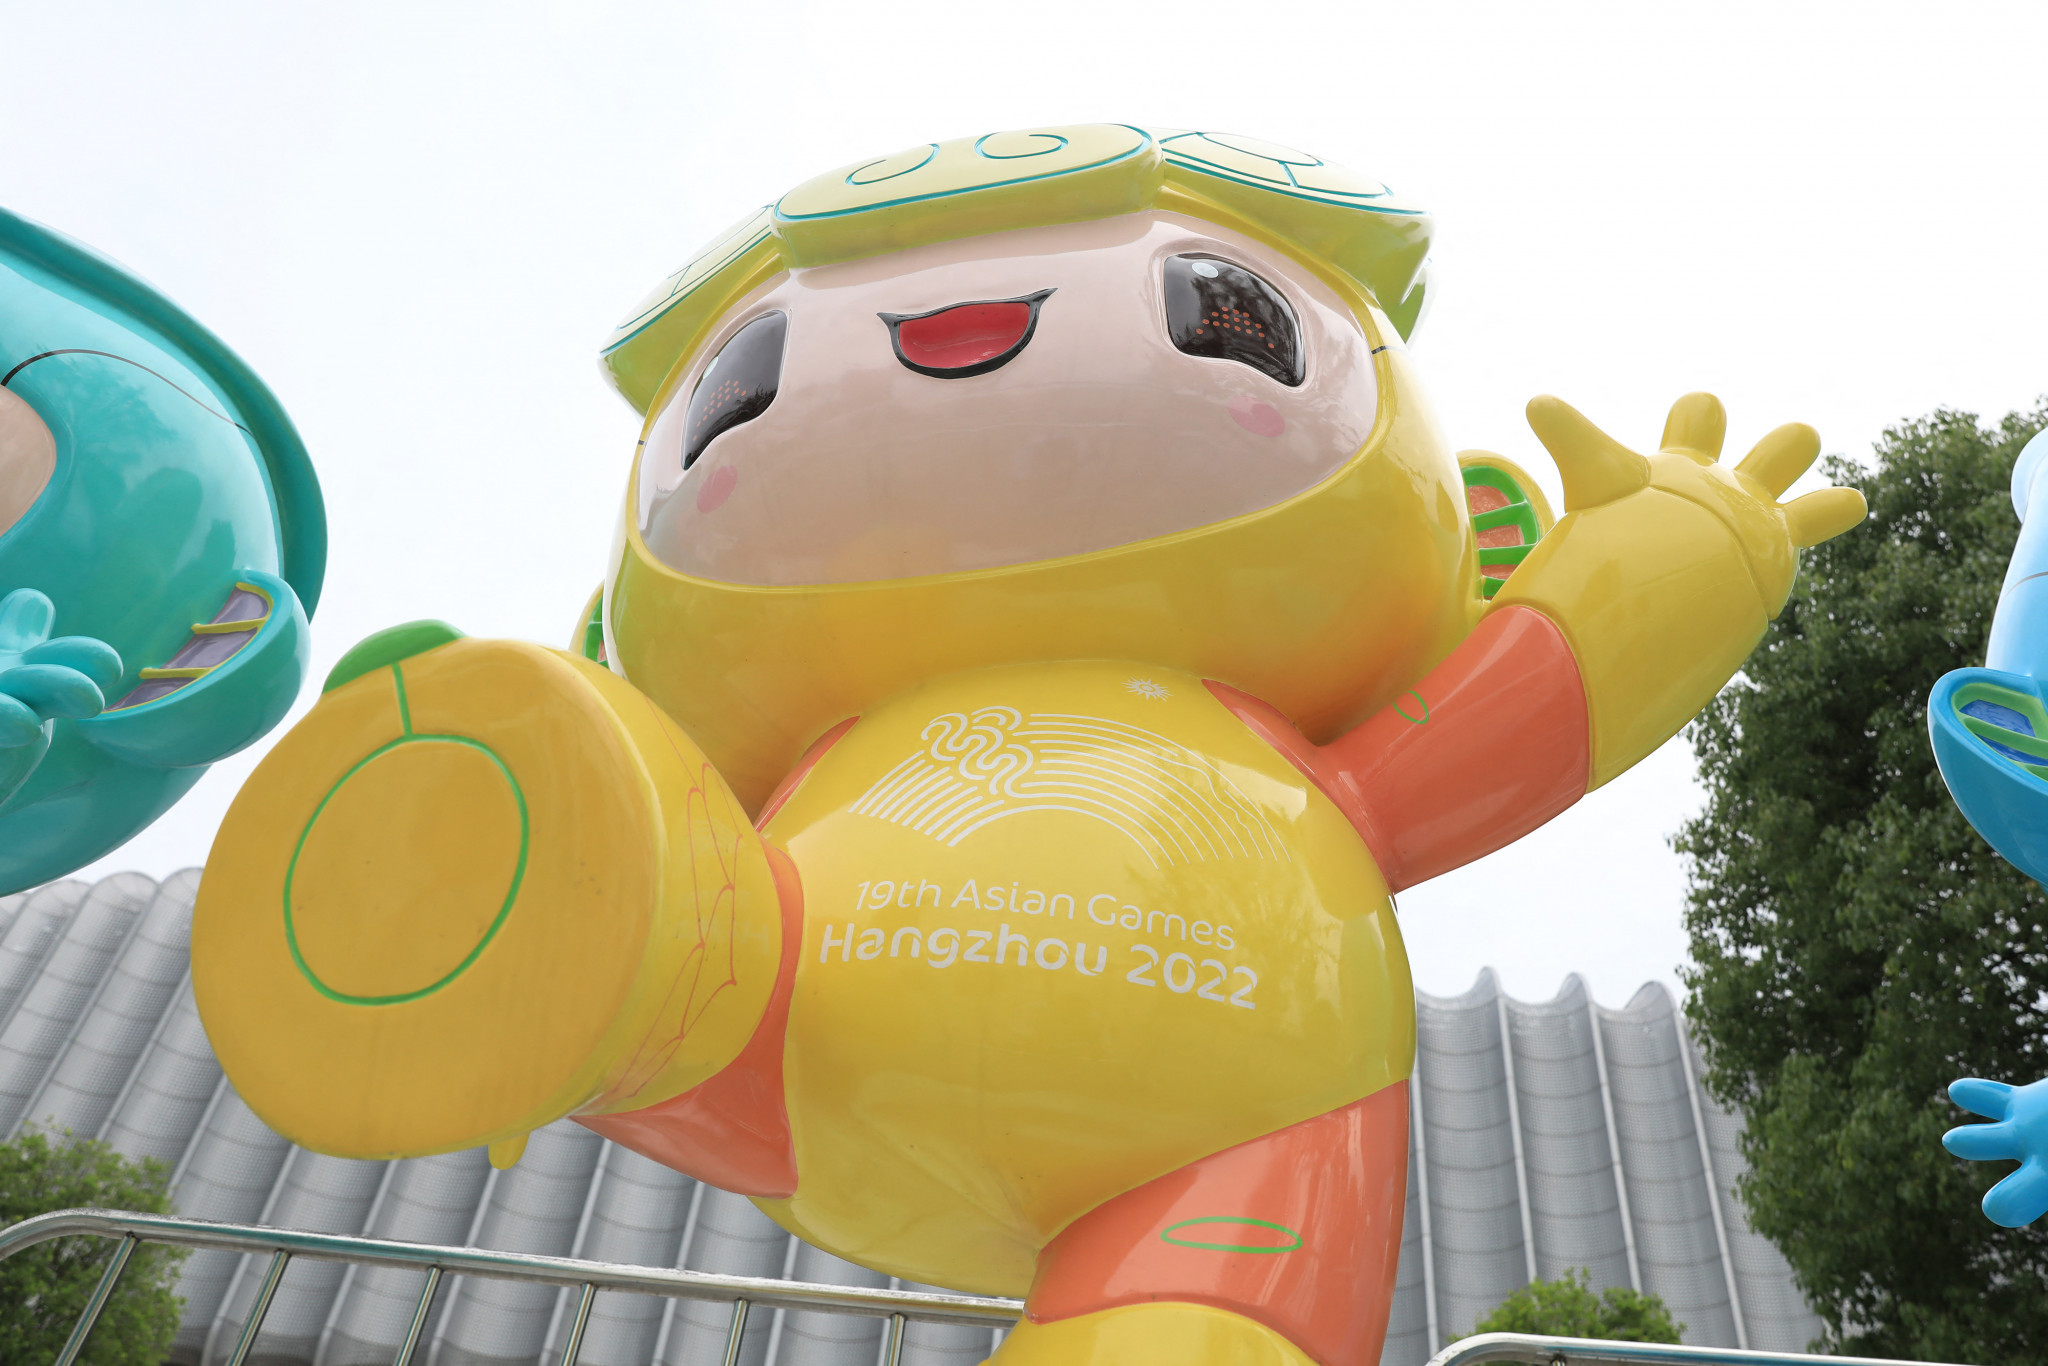 OCA promises series of events for athletes after Hangzhou 2022 postponement